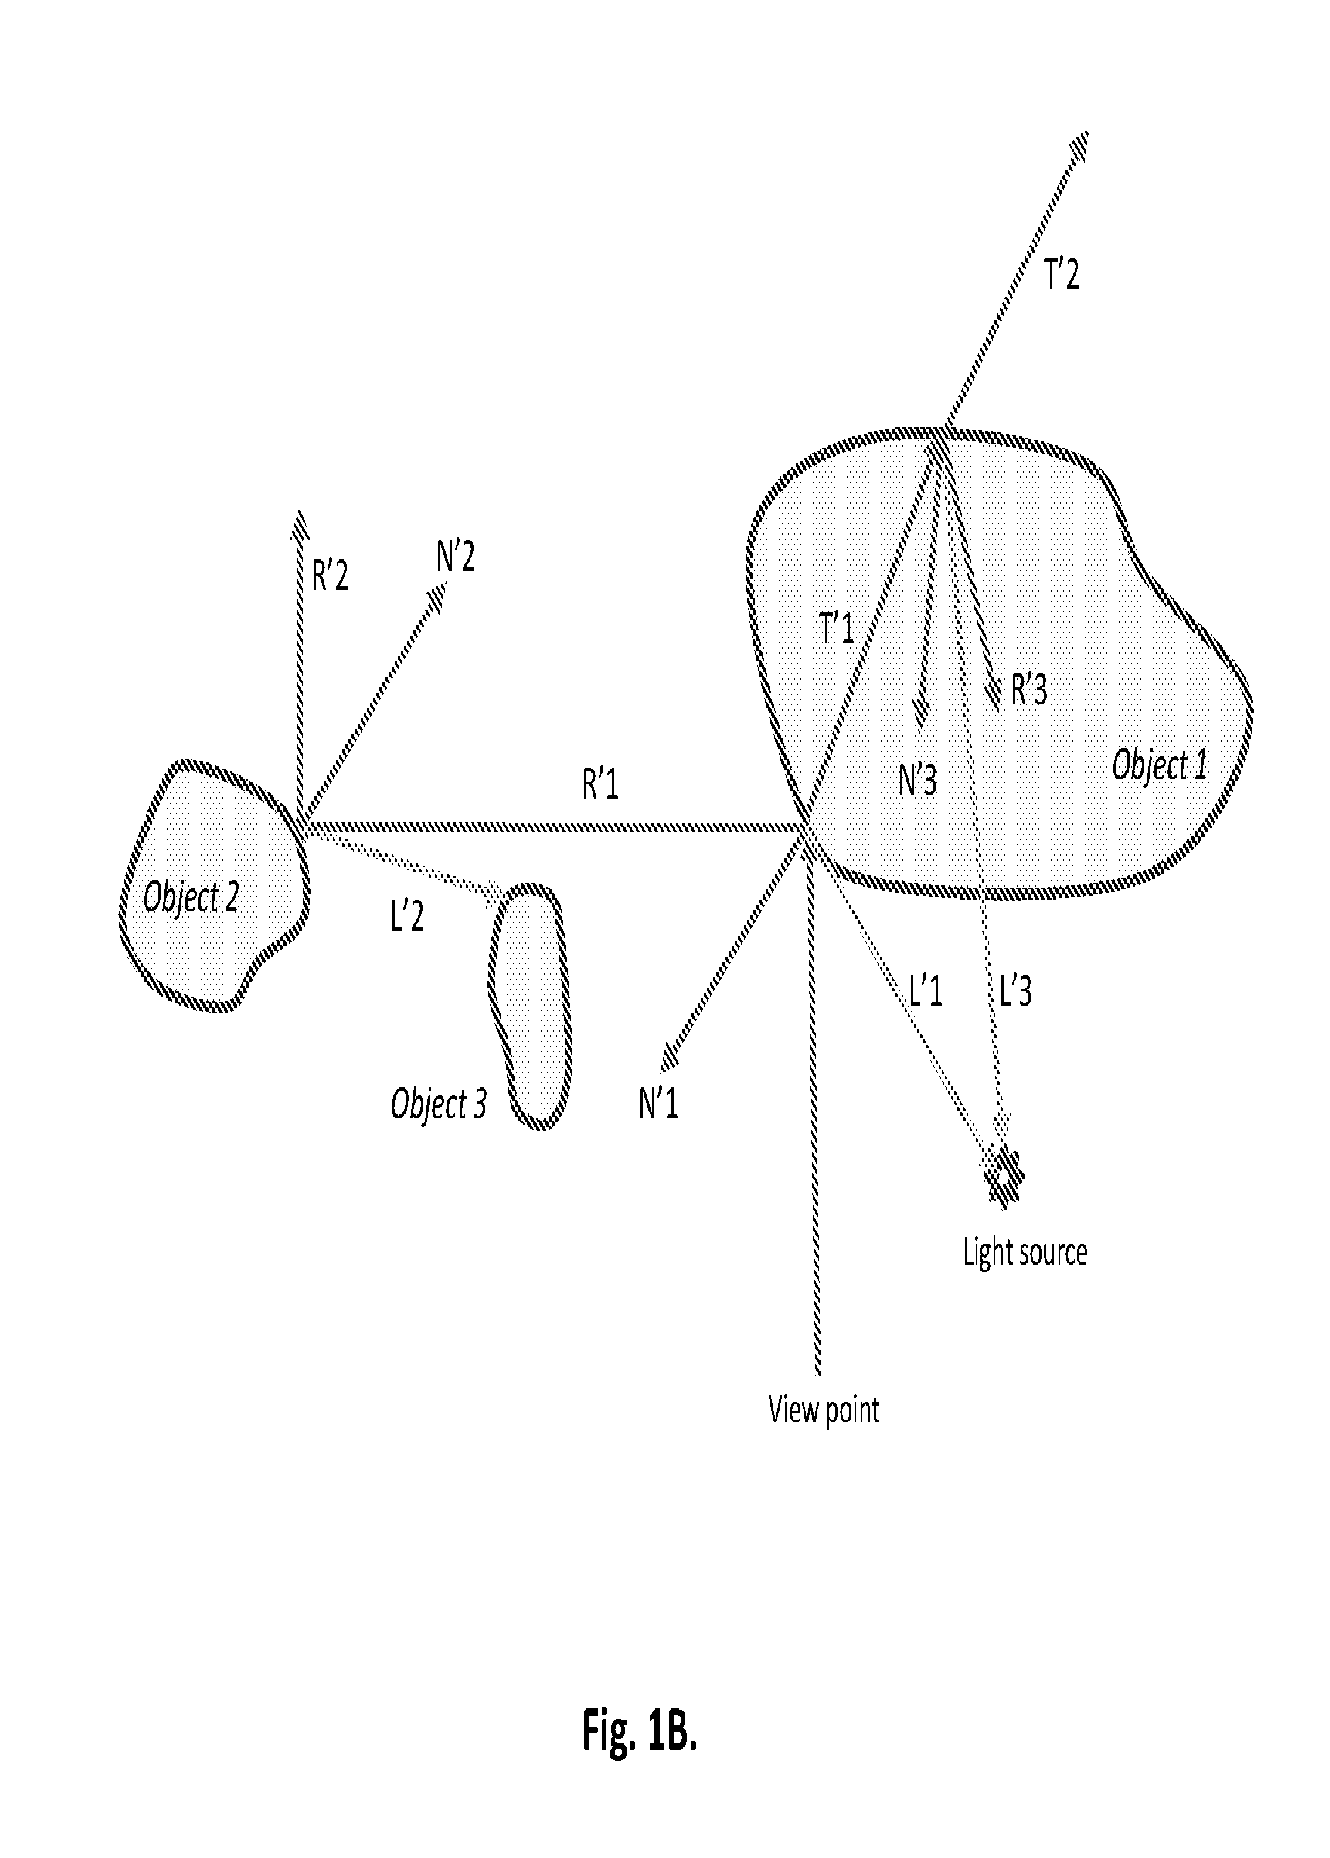 Method and Apparatus for Interprocessor Communication Employing Modular Space Division